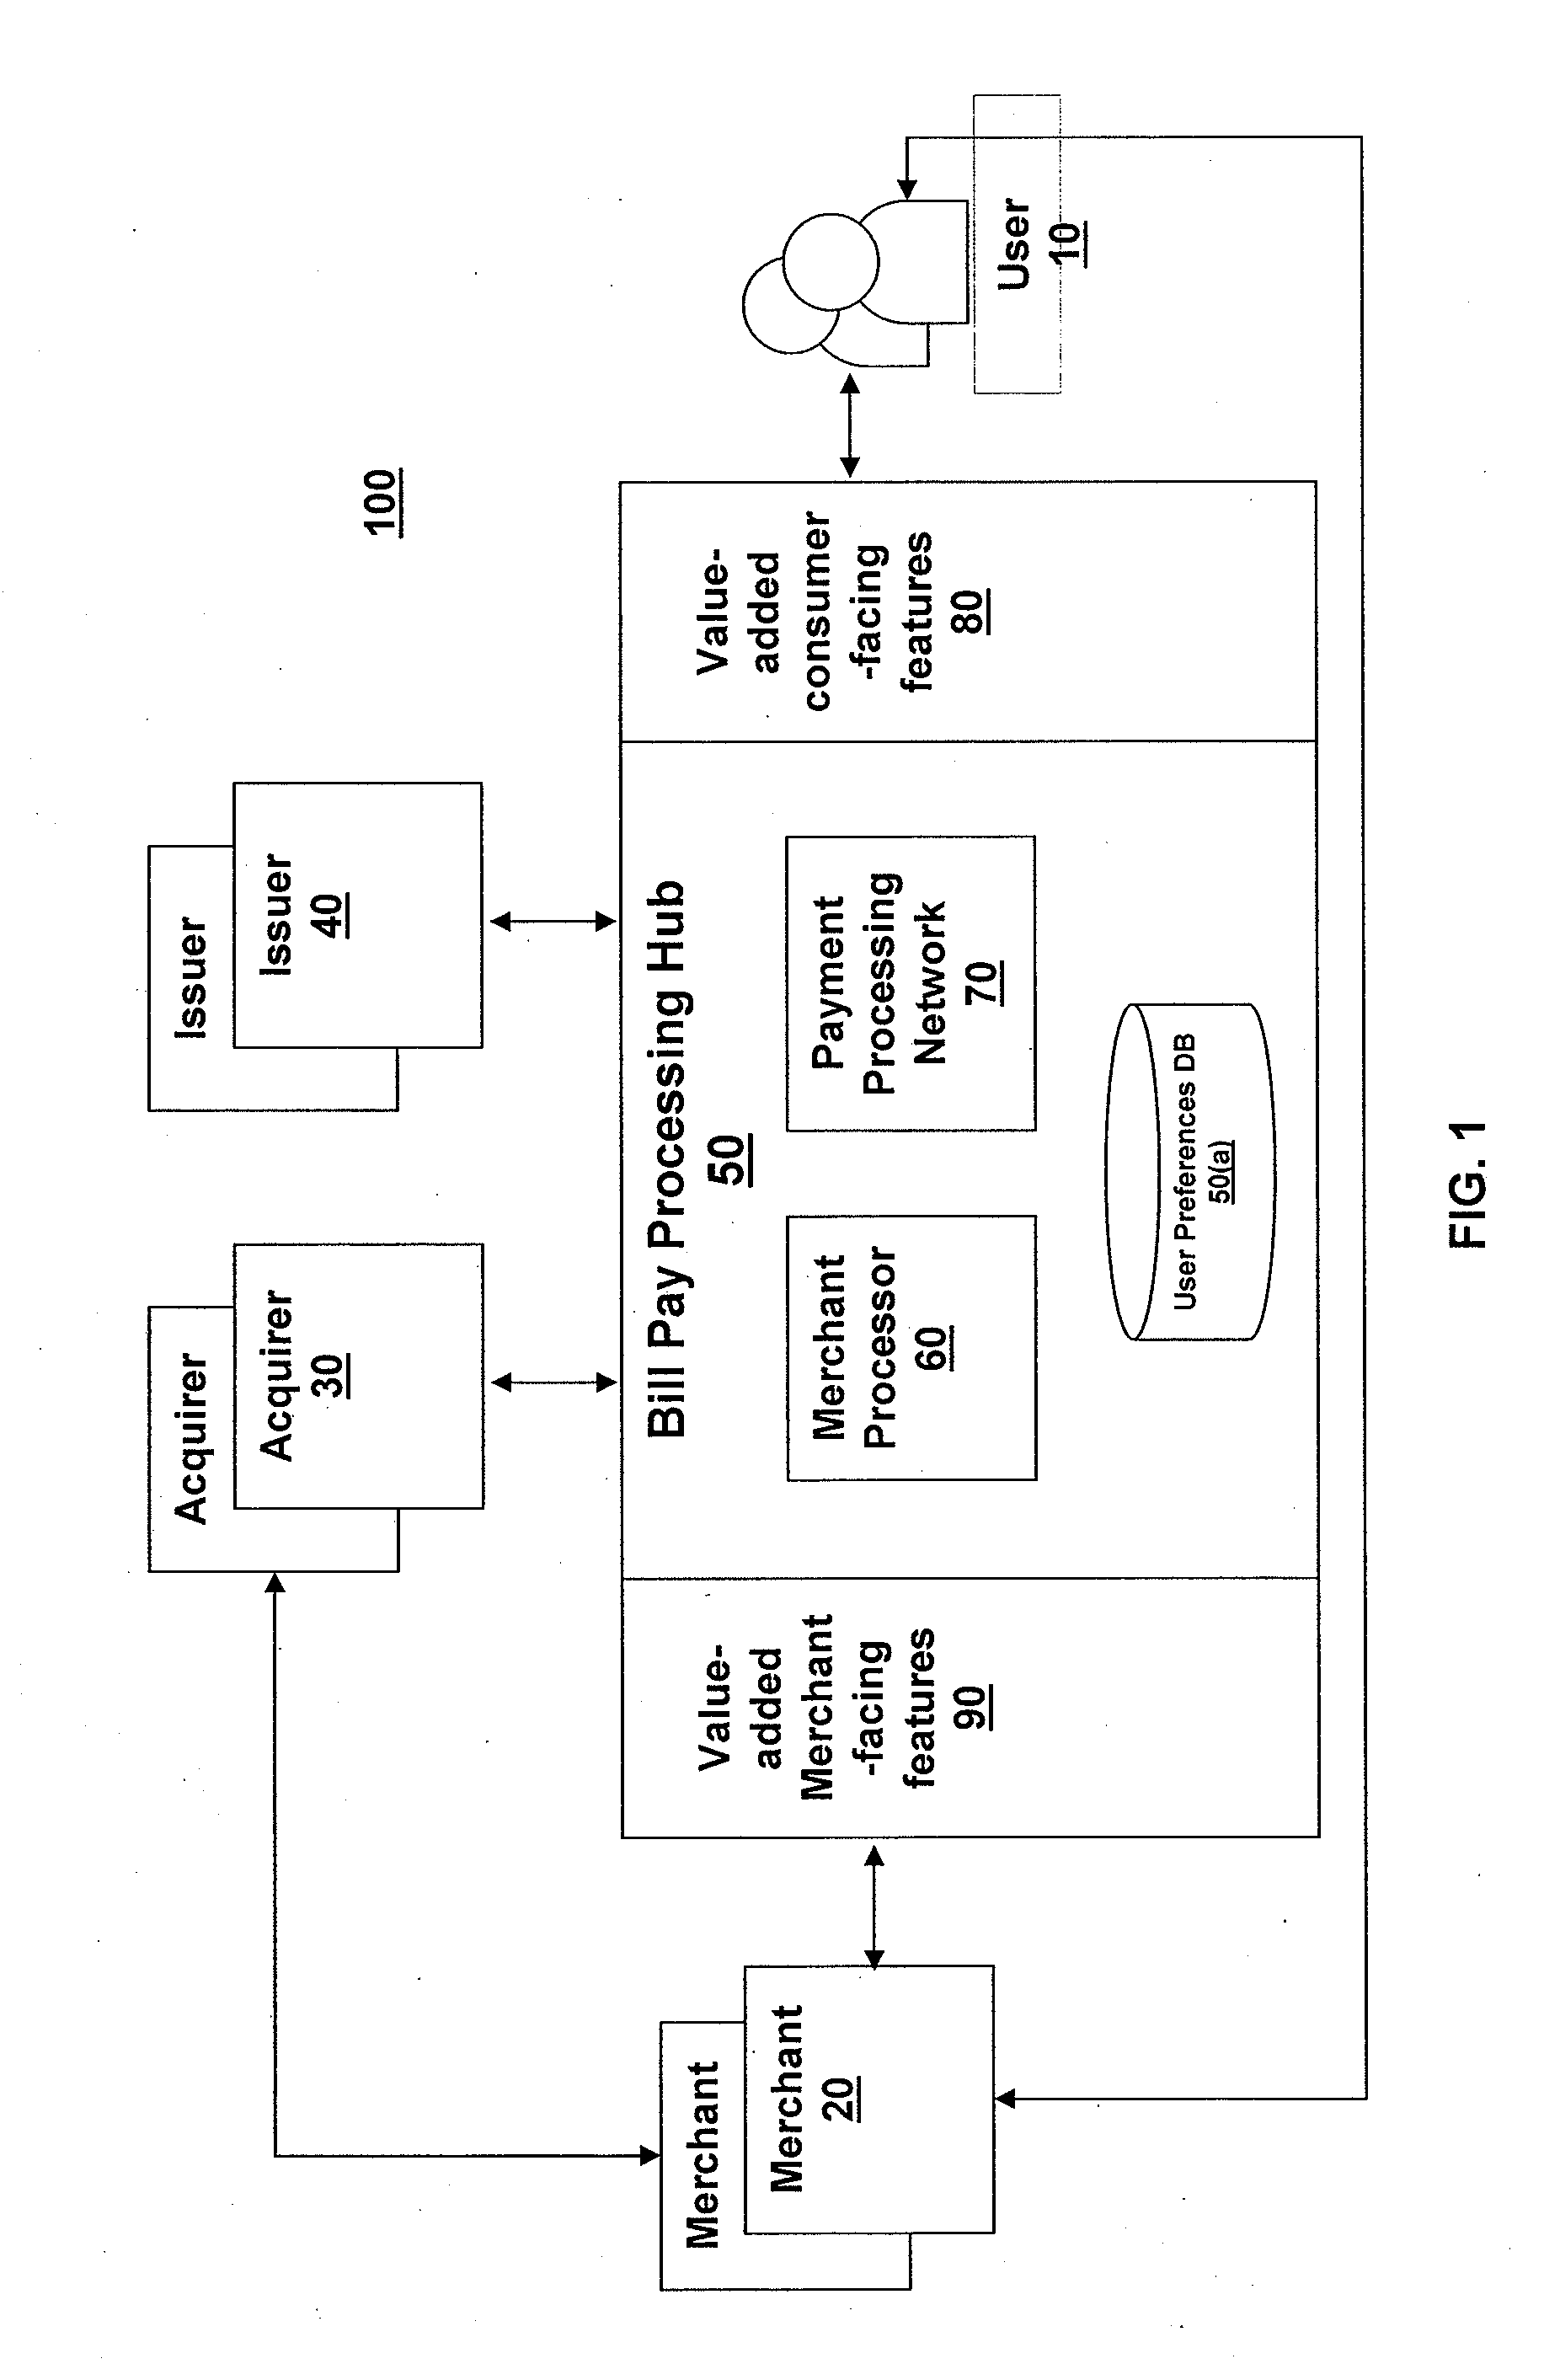 System and method for non-credit card billers to accept credit card payments